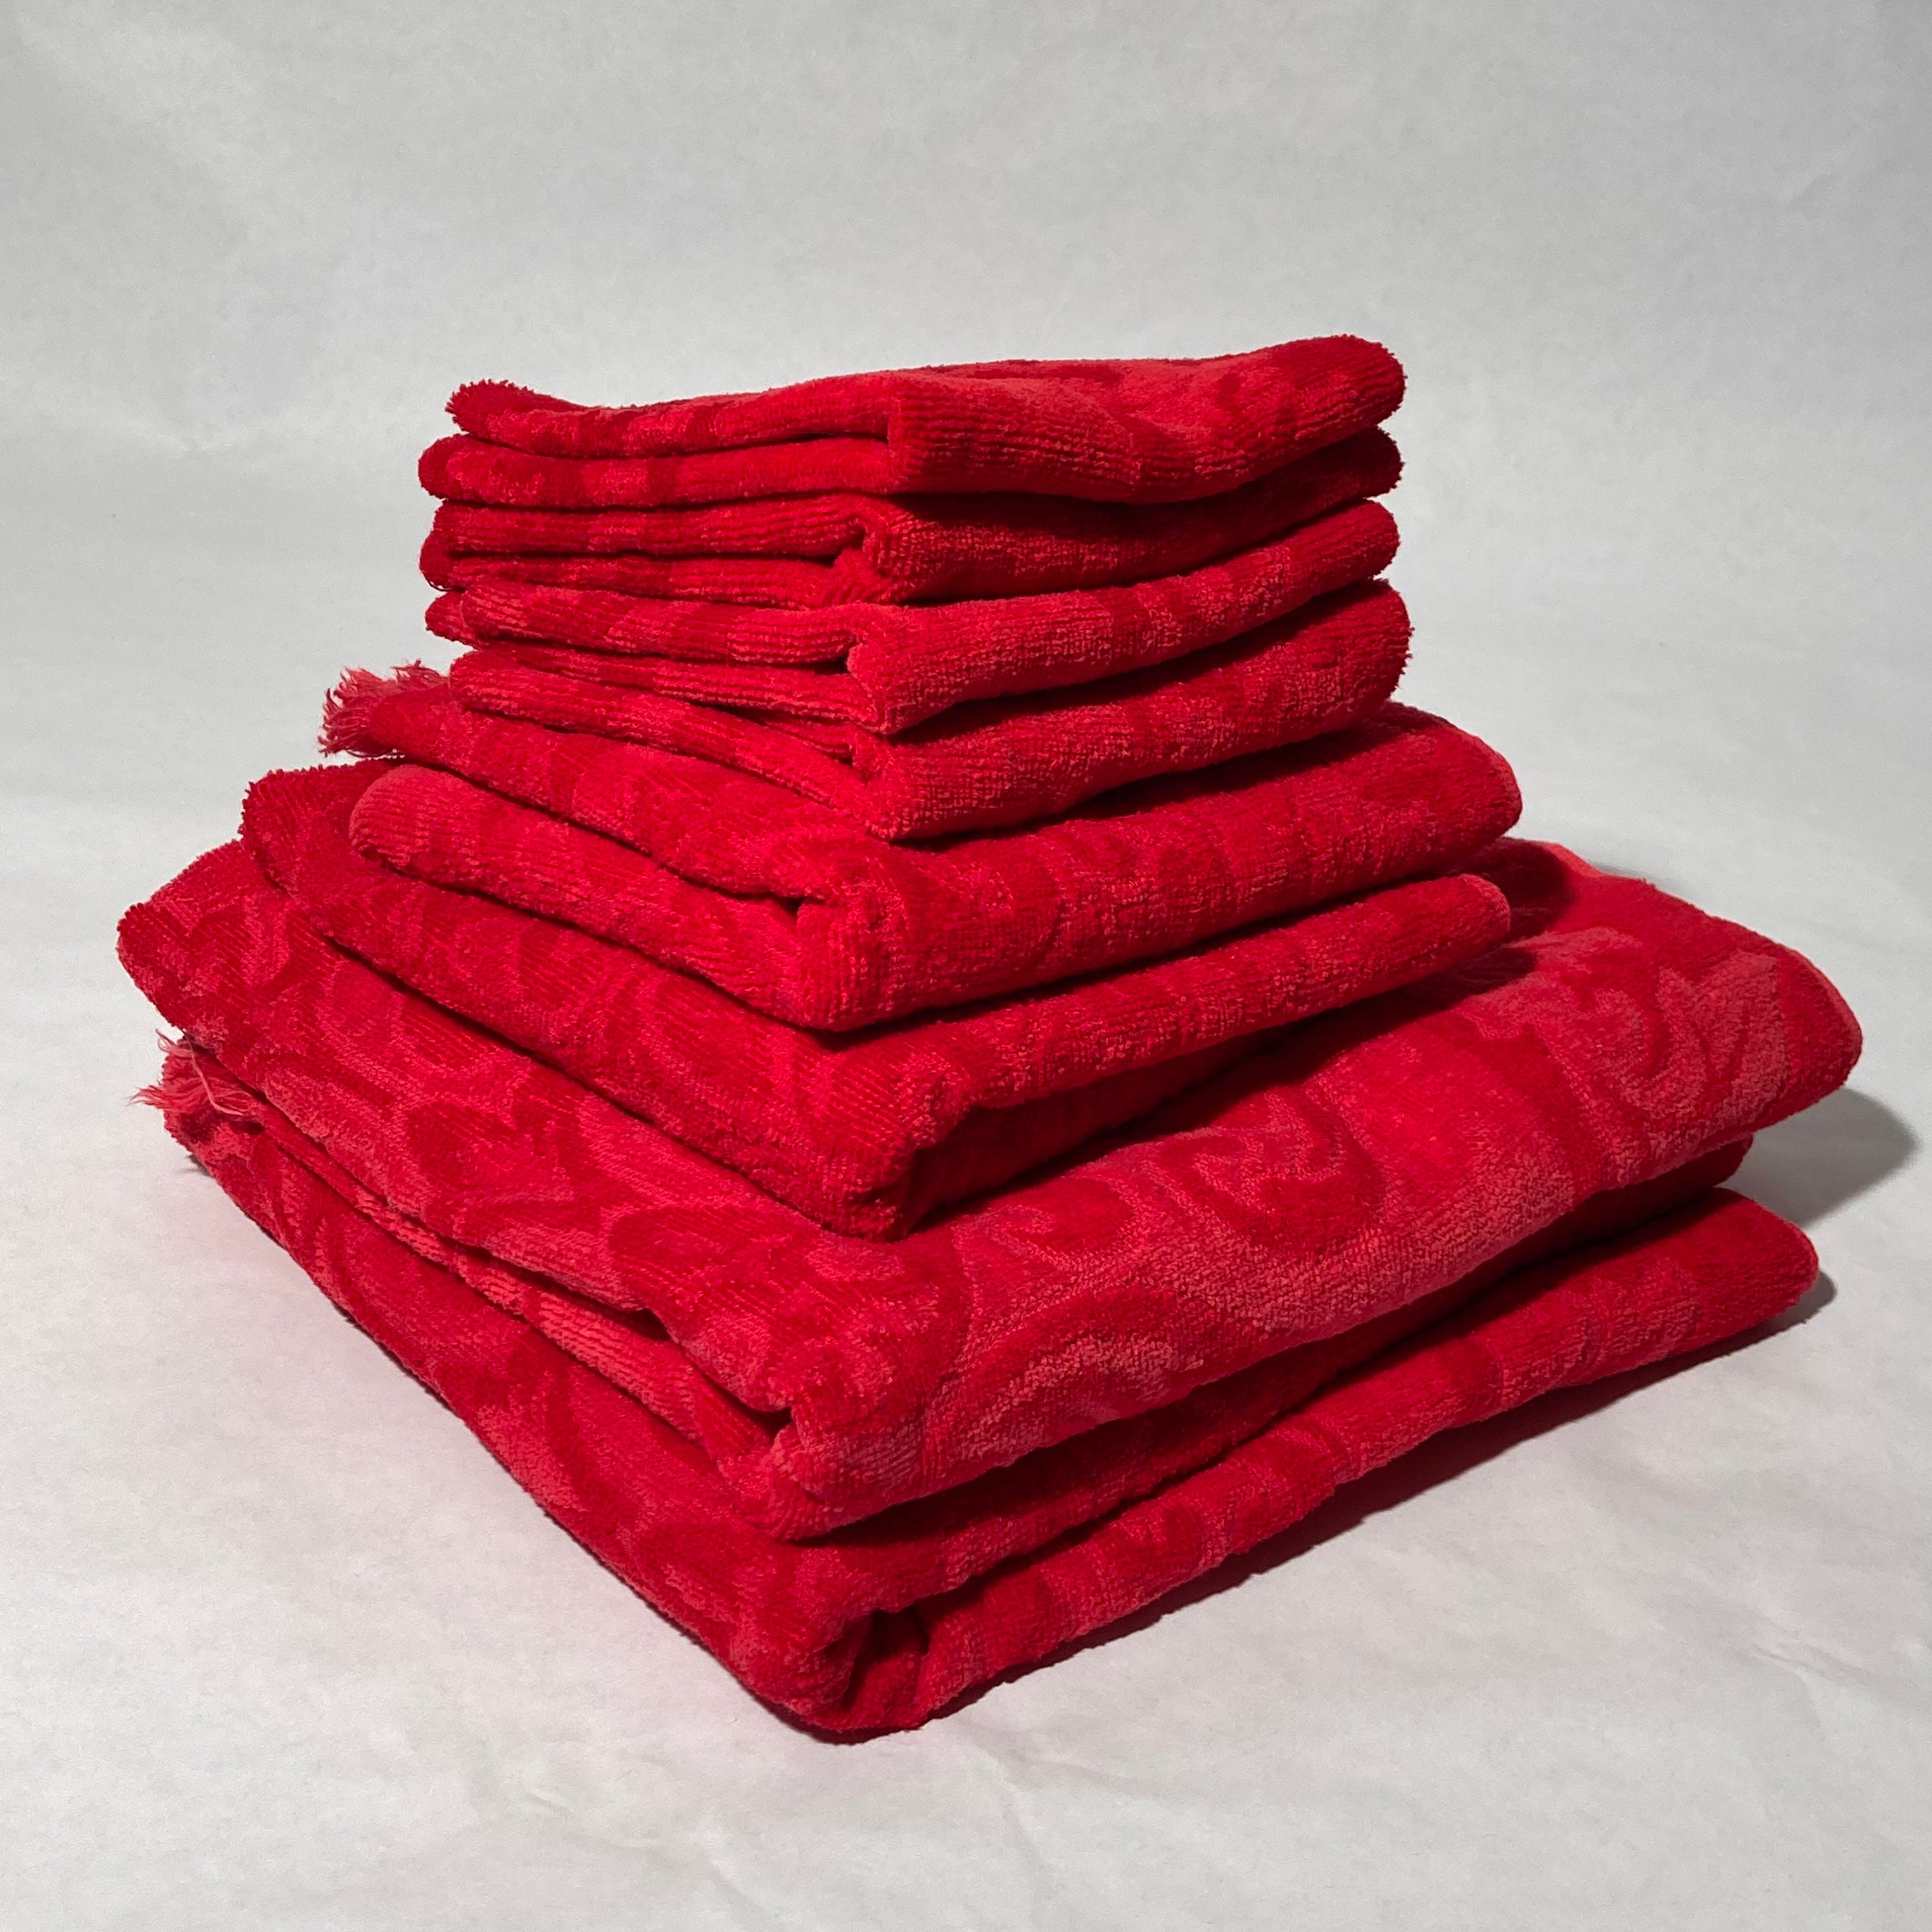 Martex® Spa Towel Collection – Now Linens